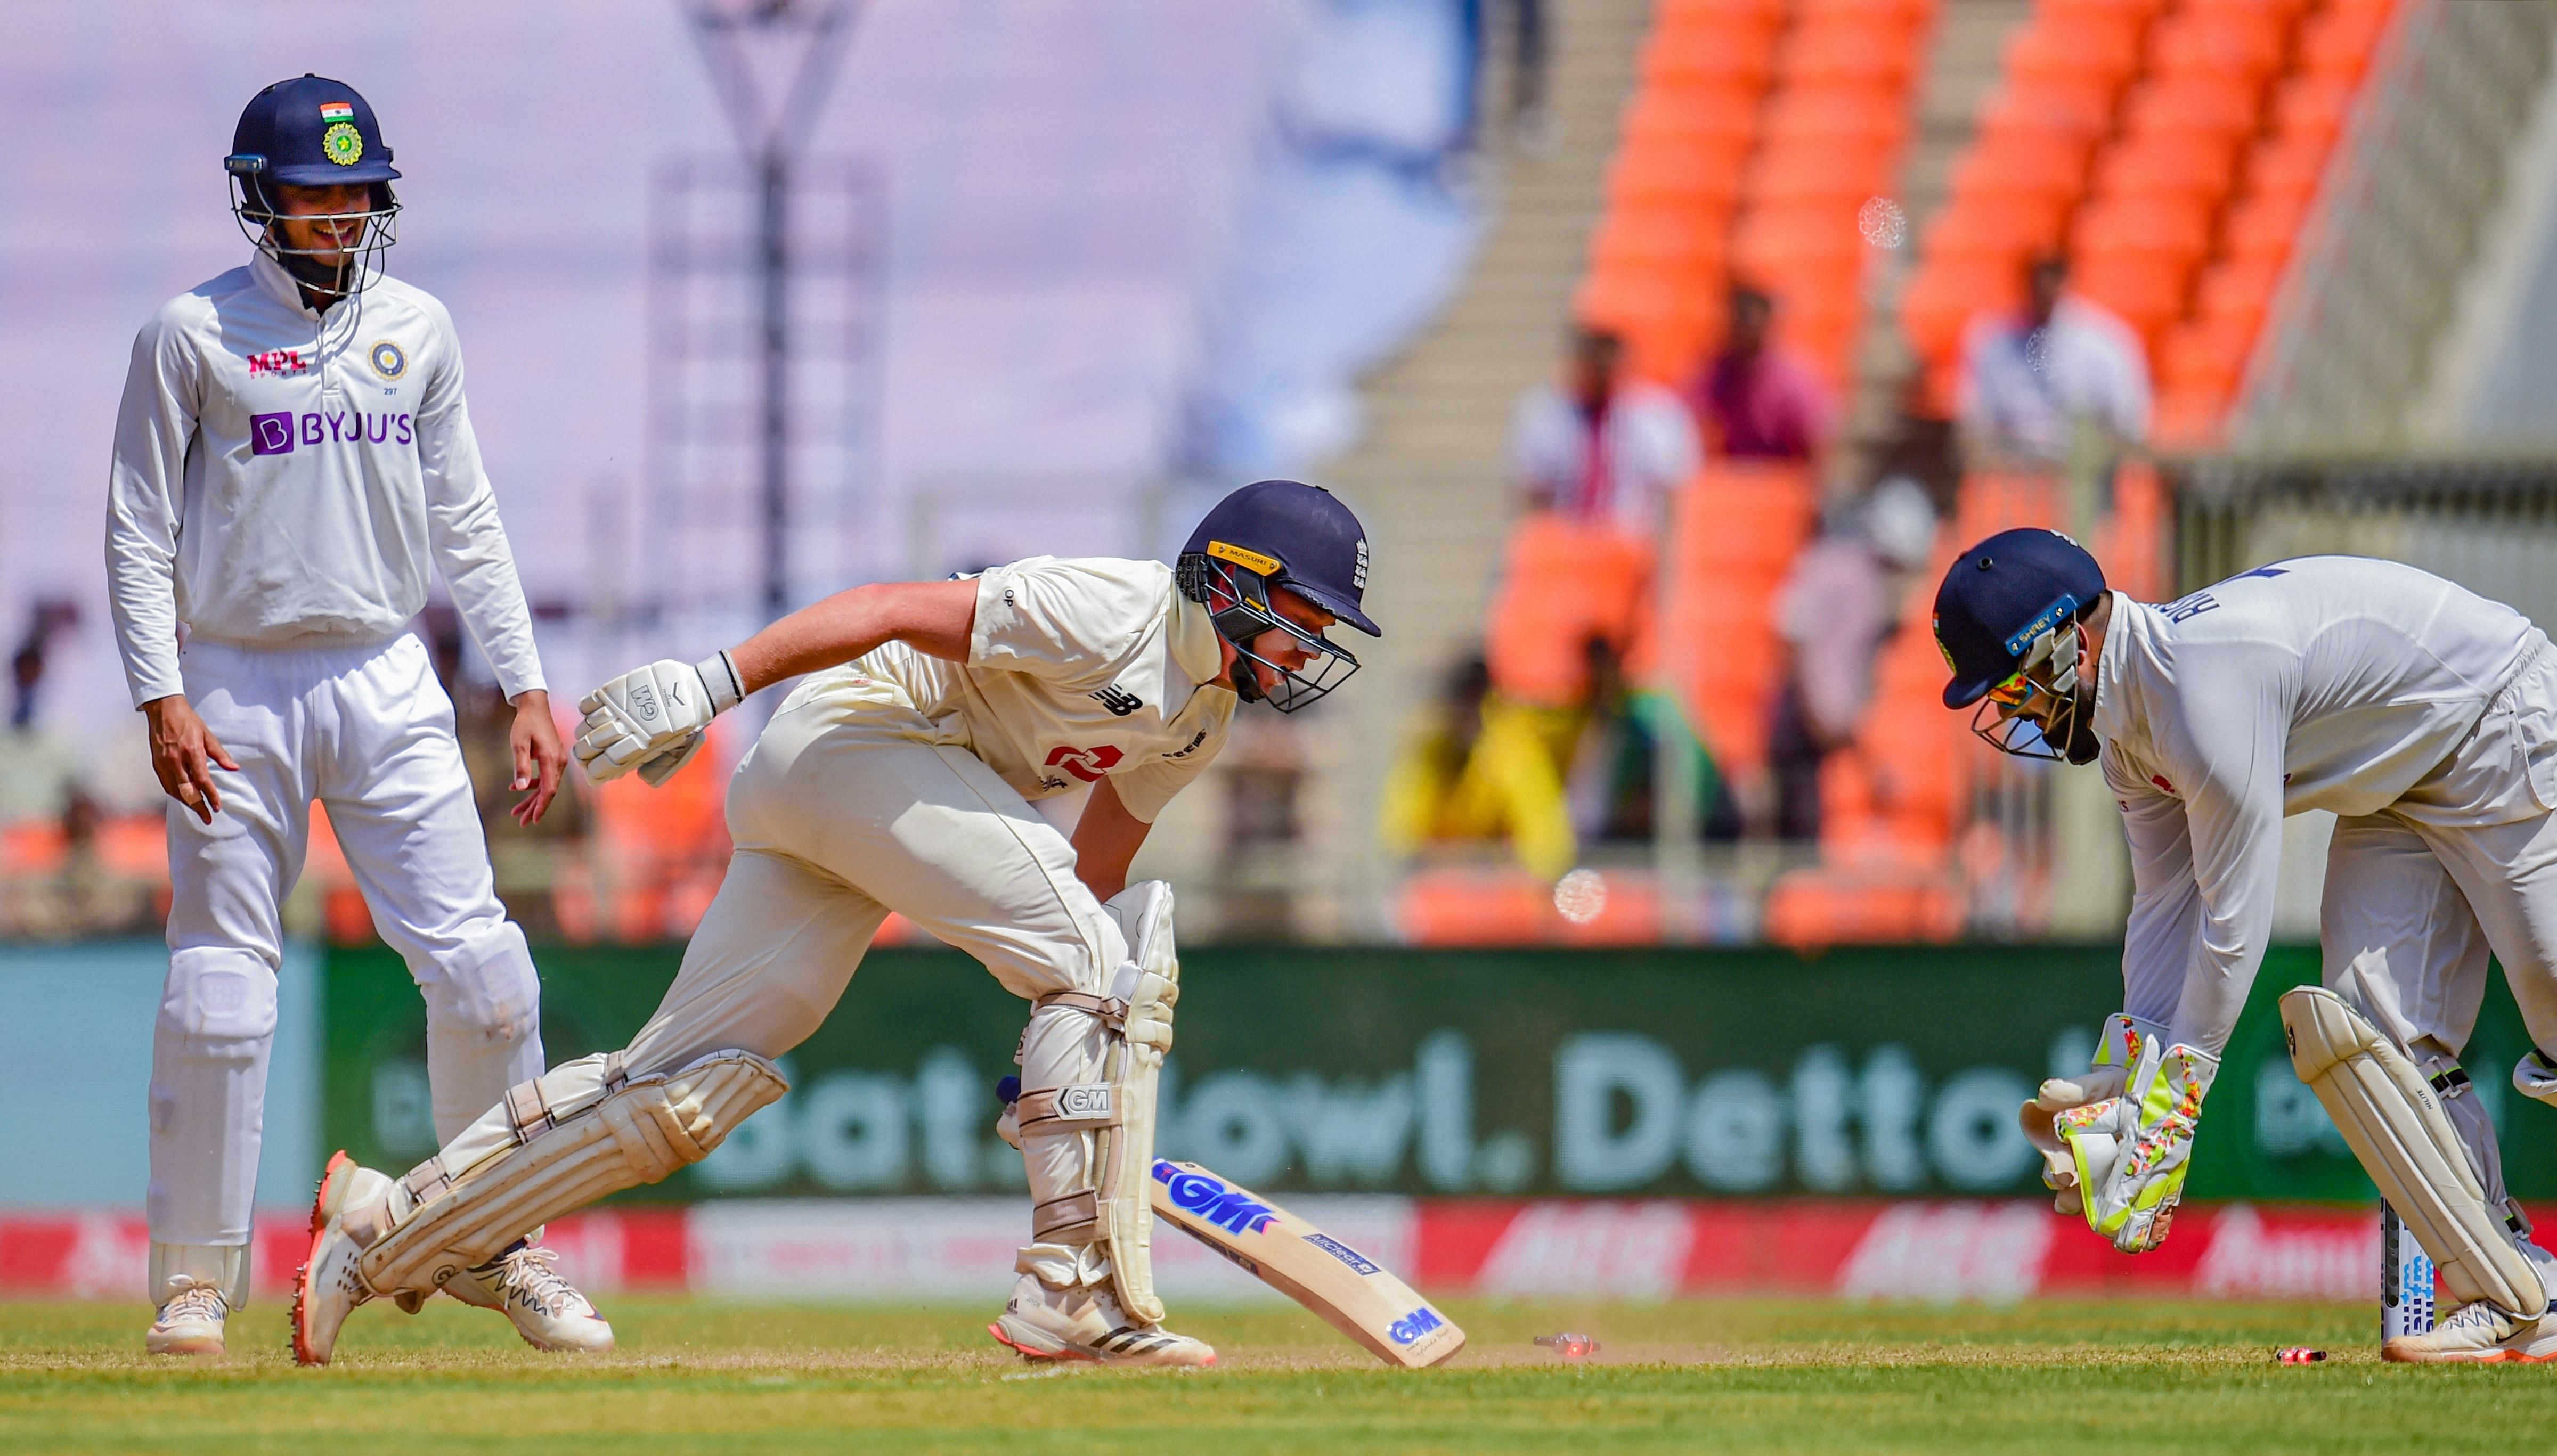 England batsman Ollie Pope being run out by Indian wicket keeper R Pant during the third day of the 4th and last cricket test match between India and England/ Representative. Credit: PTI